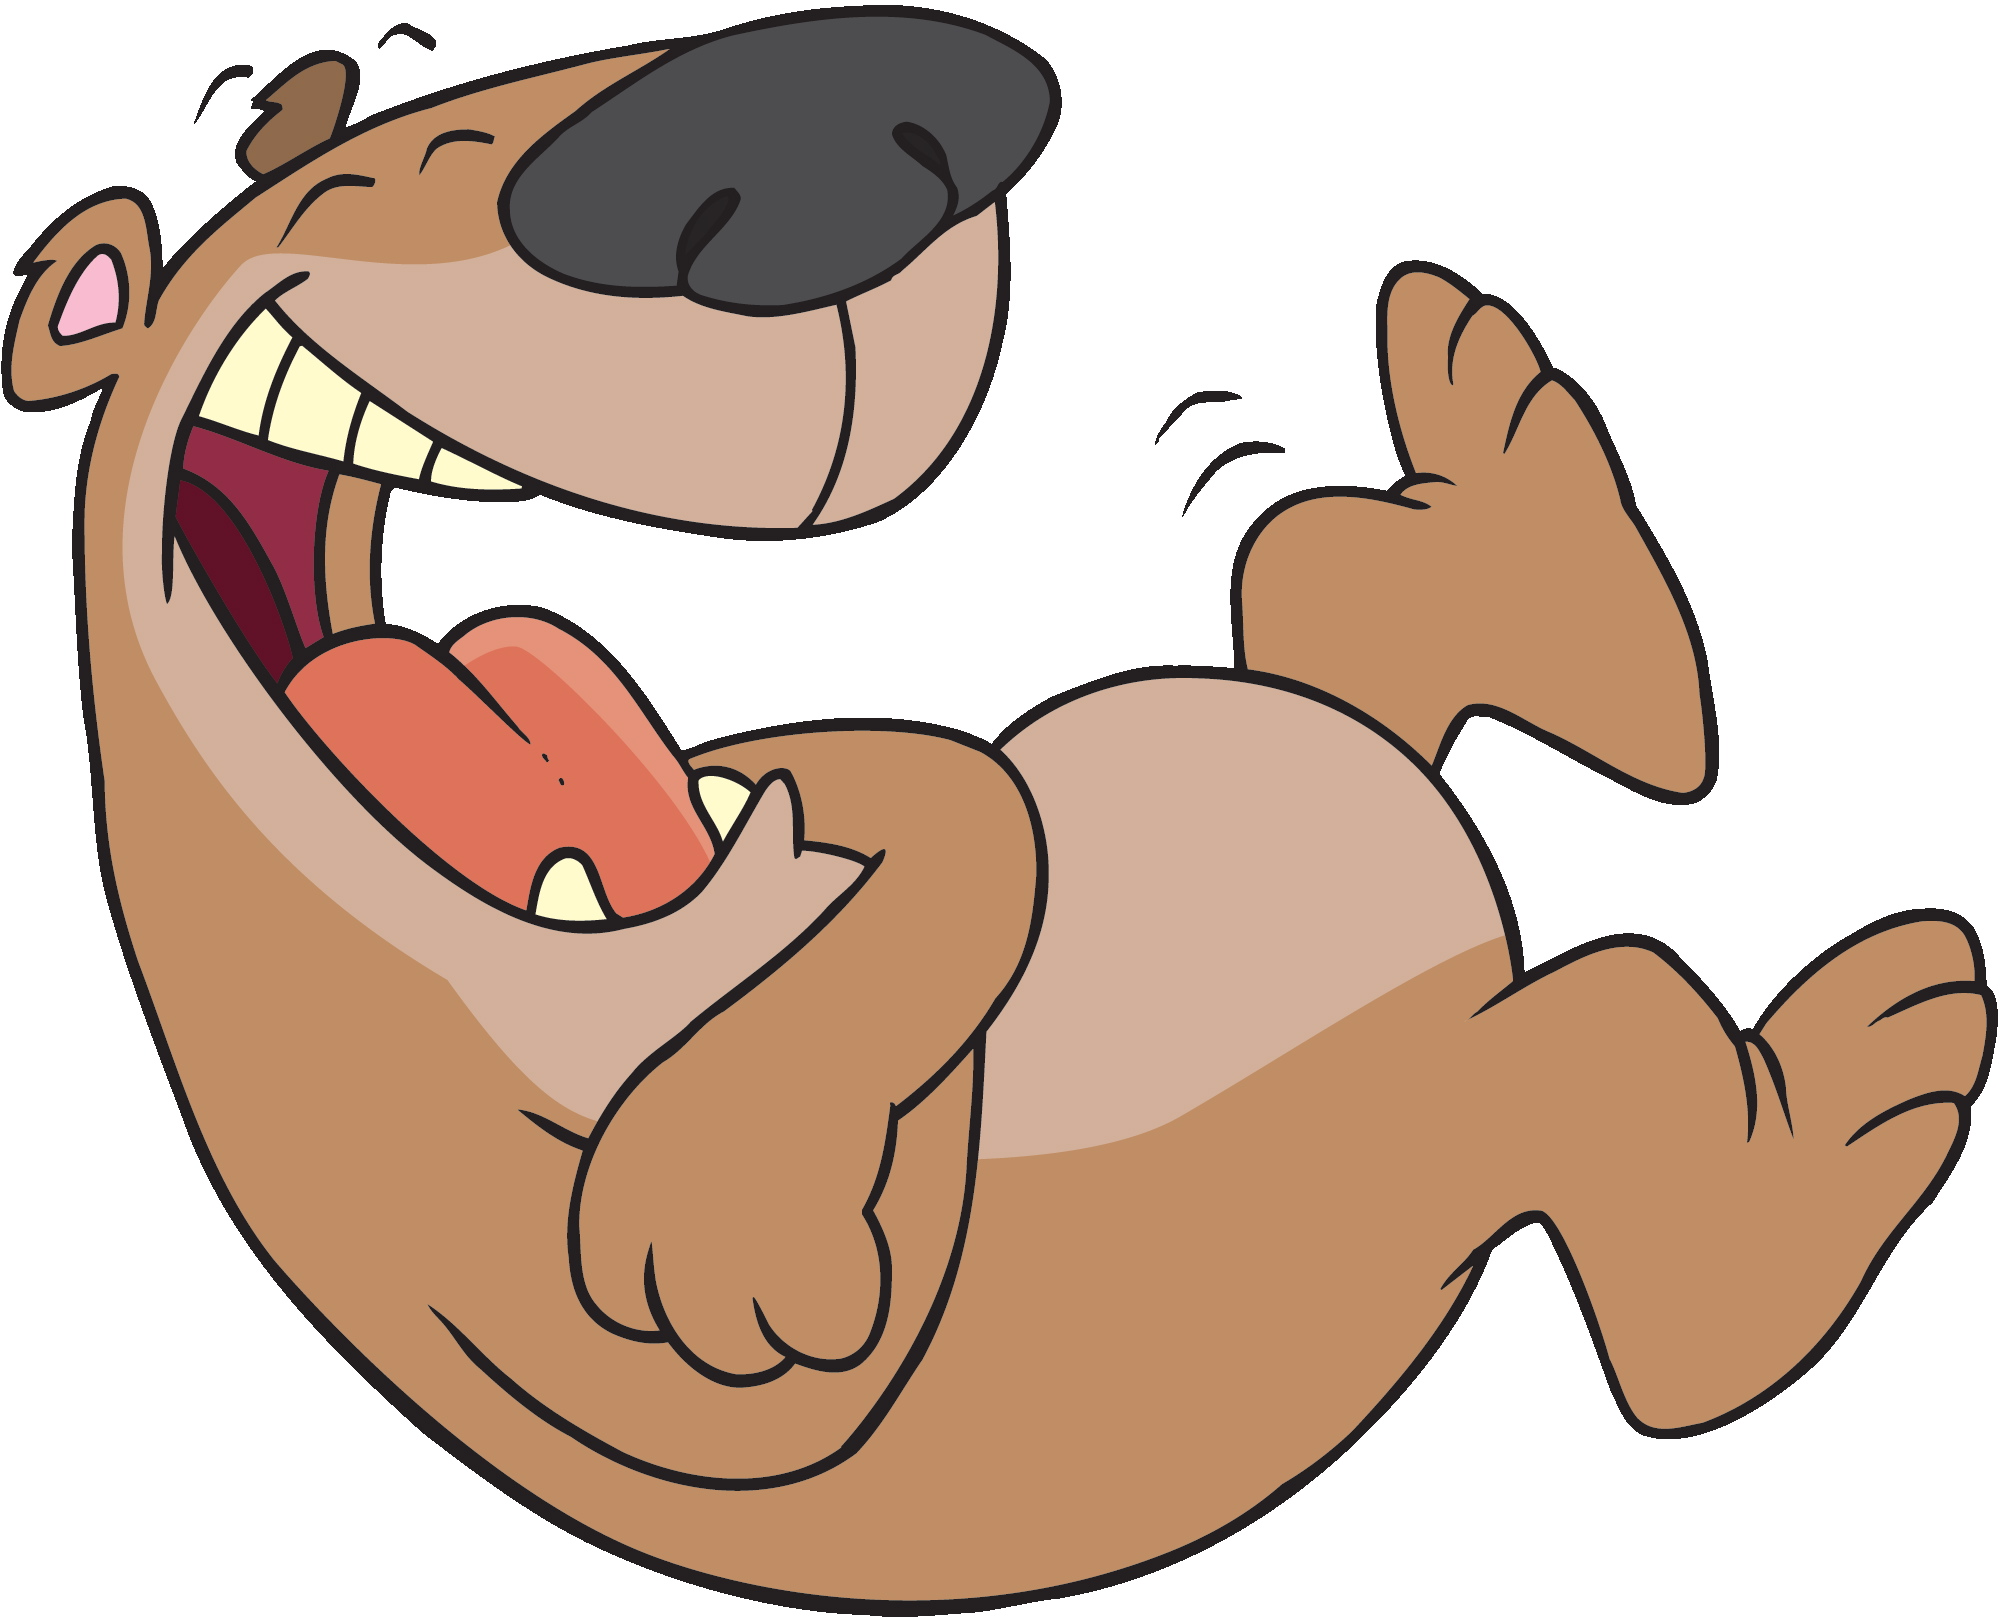 man laughing clipart - photo #33